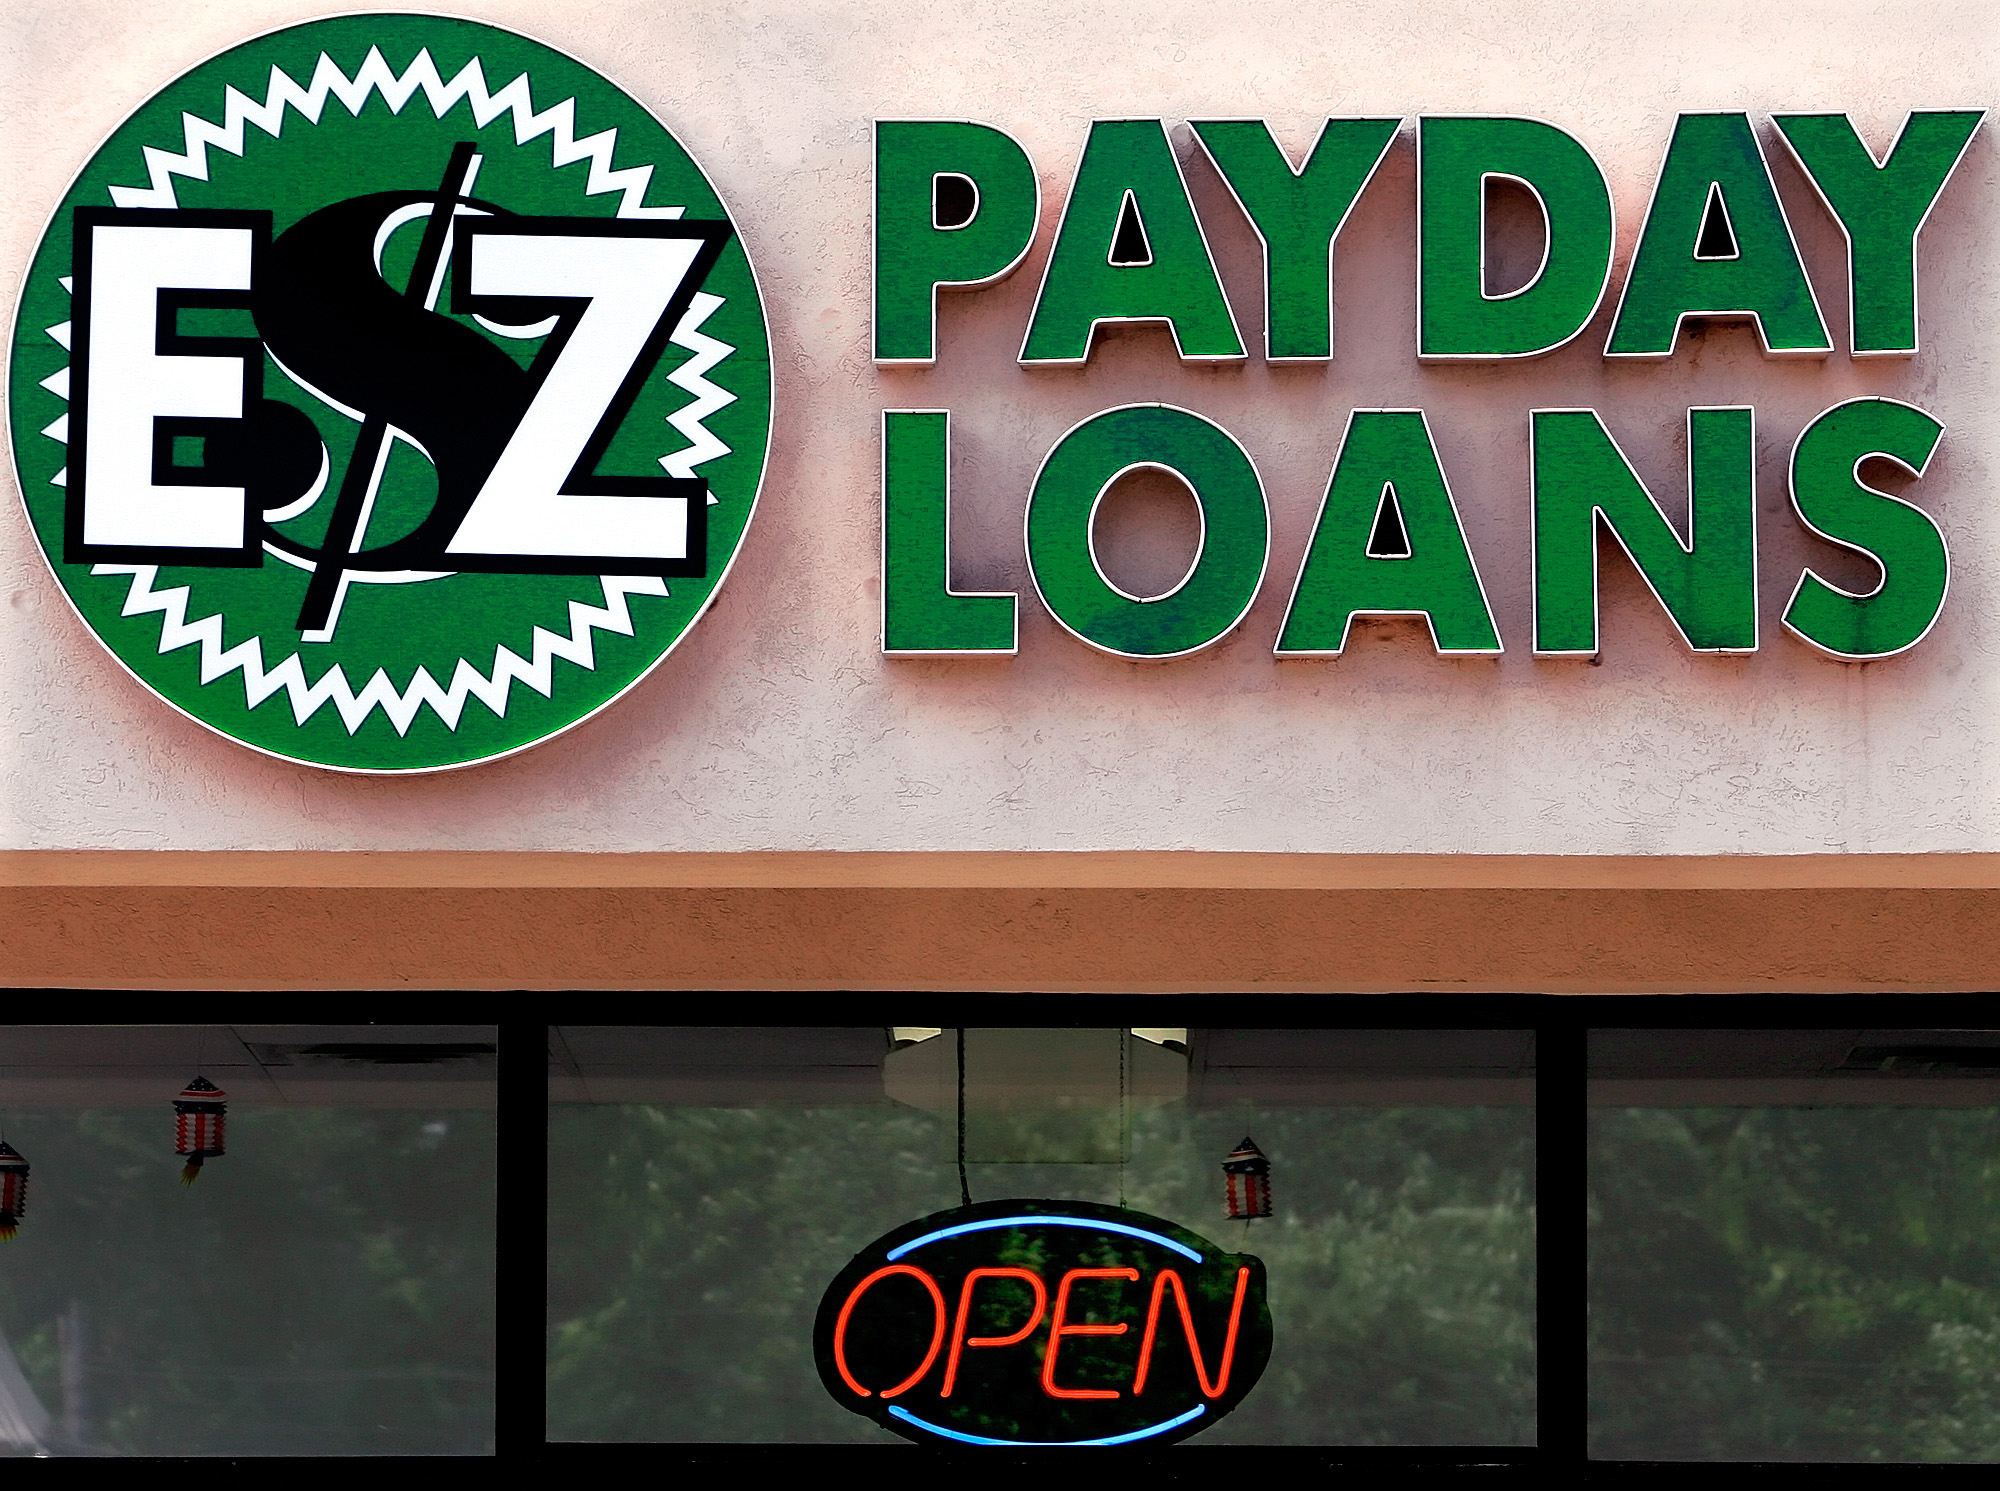 Credit union group offers alternative to payday loans - The Blade